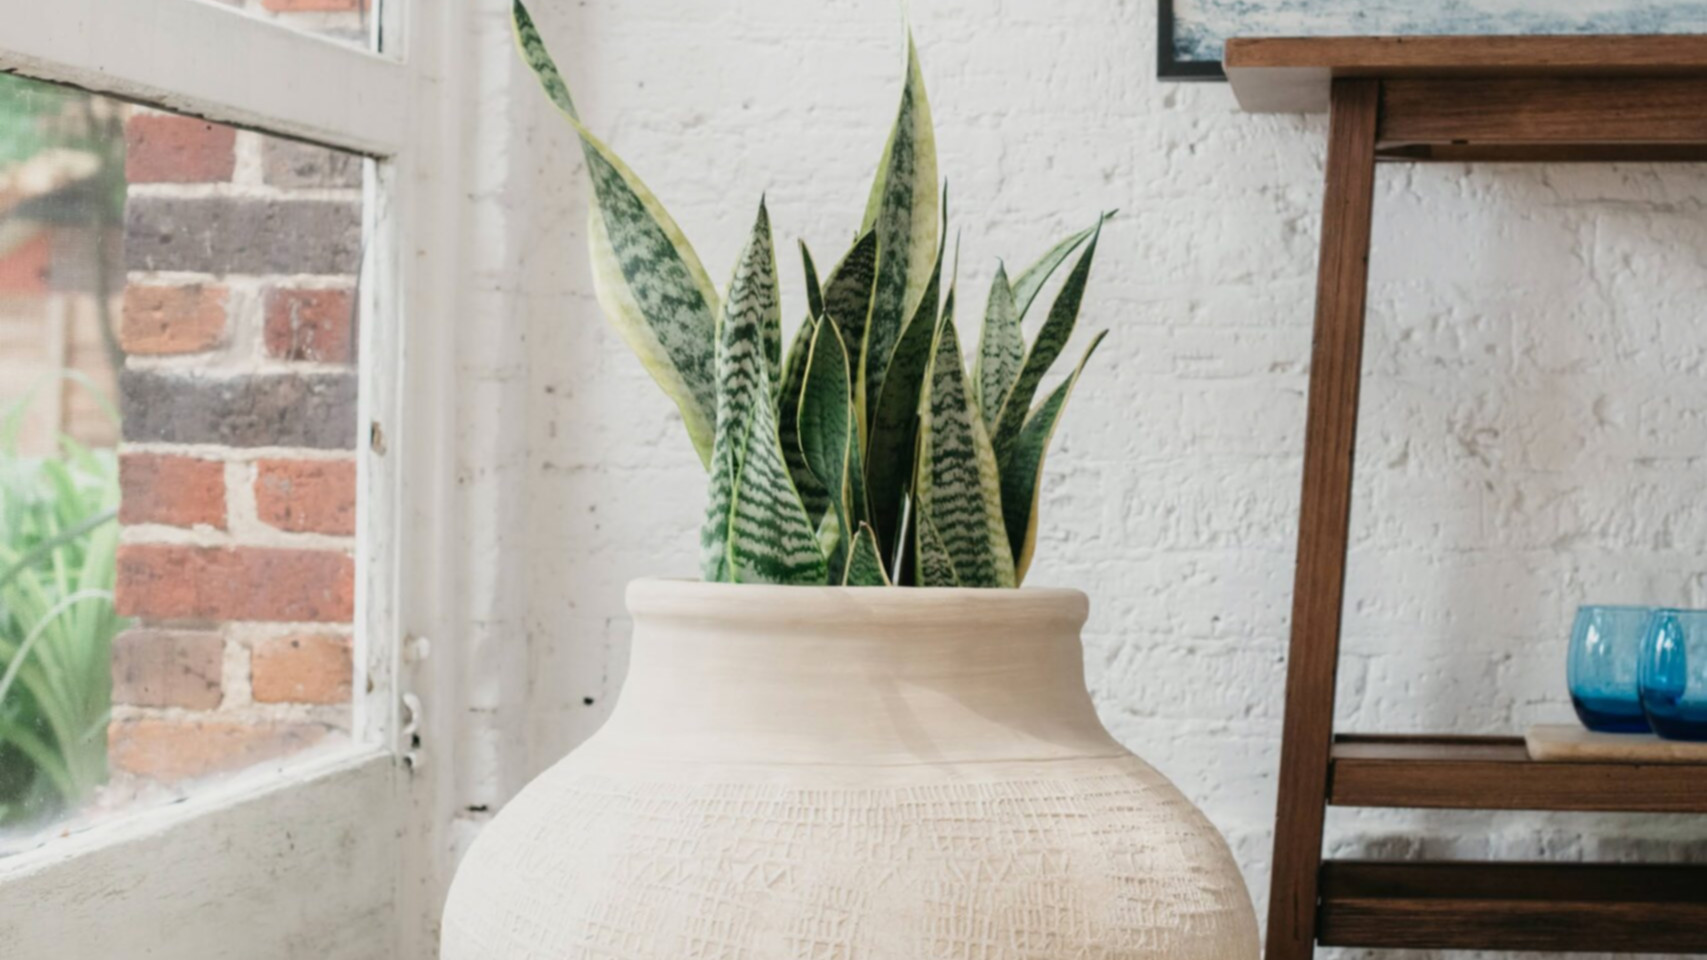 15 of the Best Pots and Planters for Indoor Plants